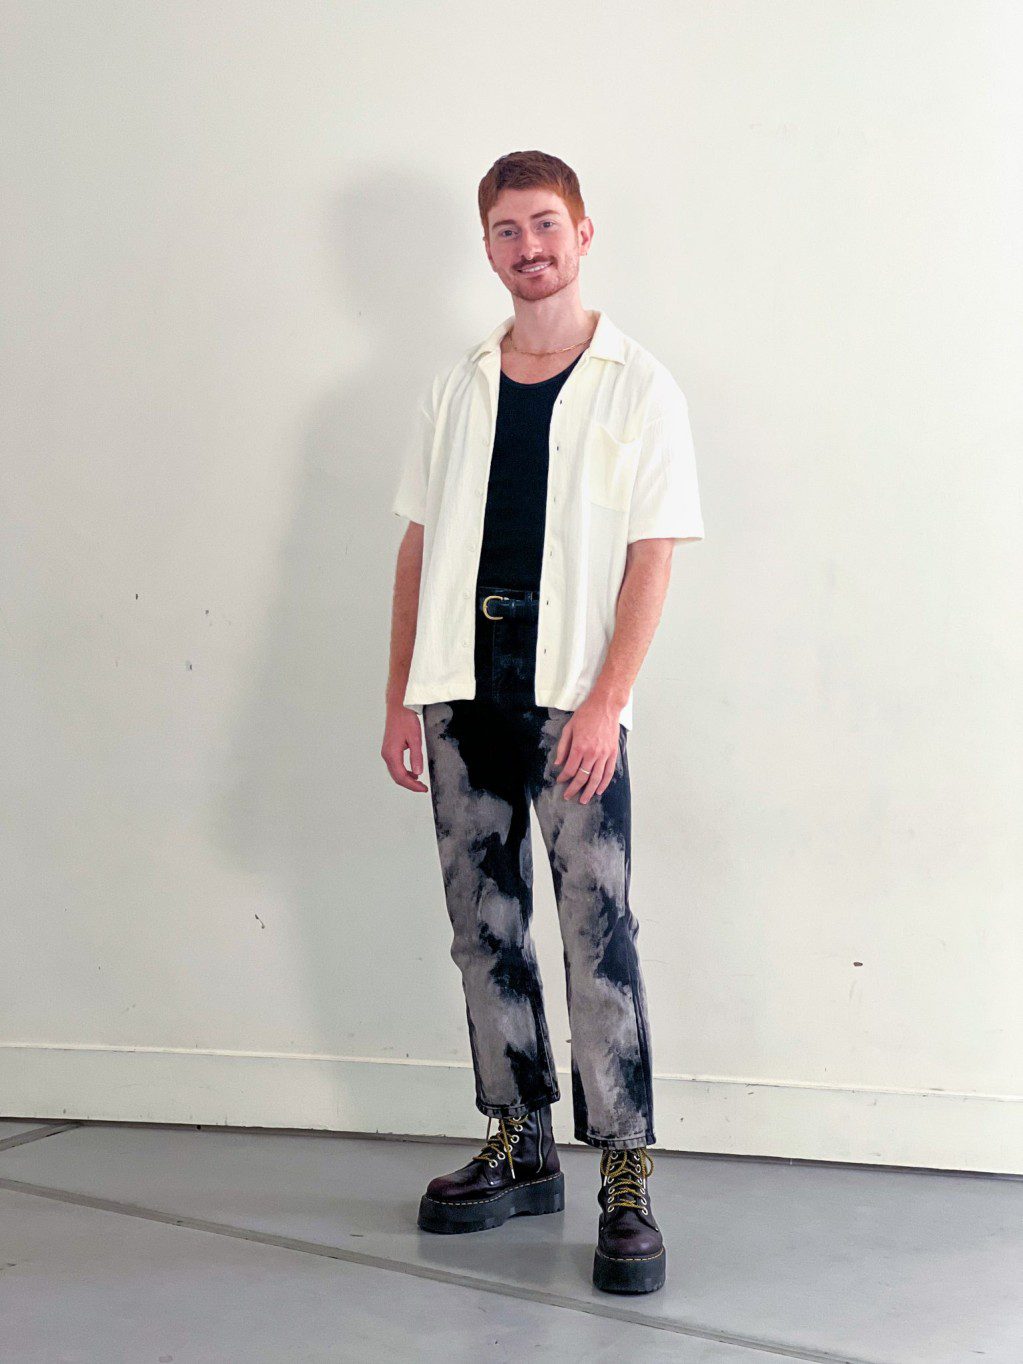 A full-body photograph of David smiling for the camera; a tall, non-disabled person with fair skin, red hair and gold jewelery with a white collared shirt, black and grey pants, and red shoes.